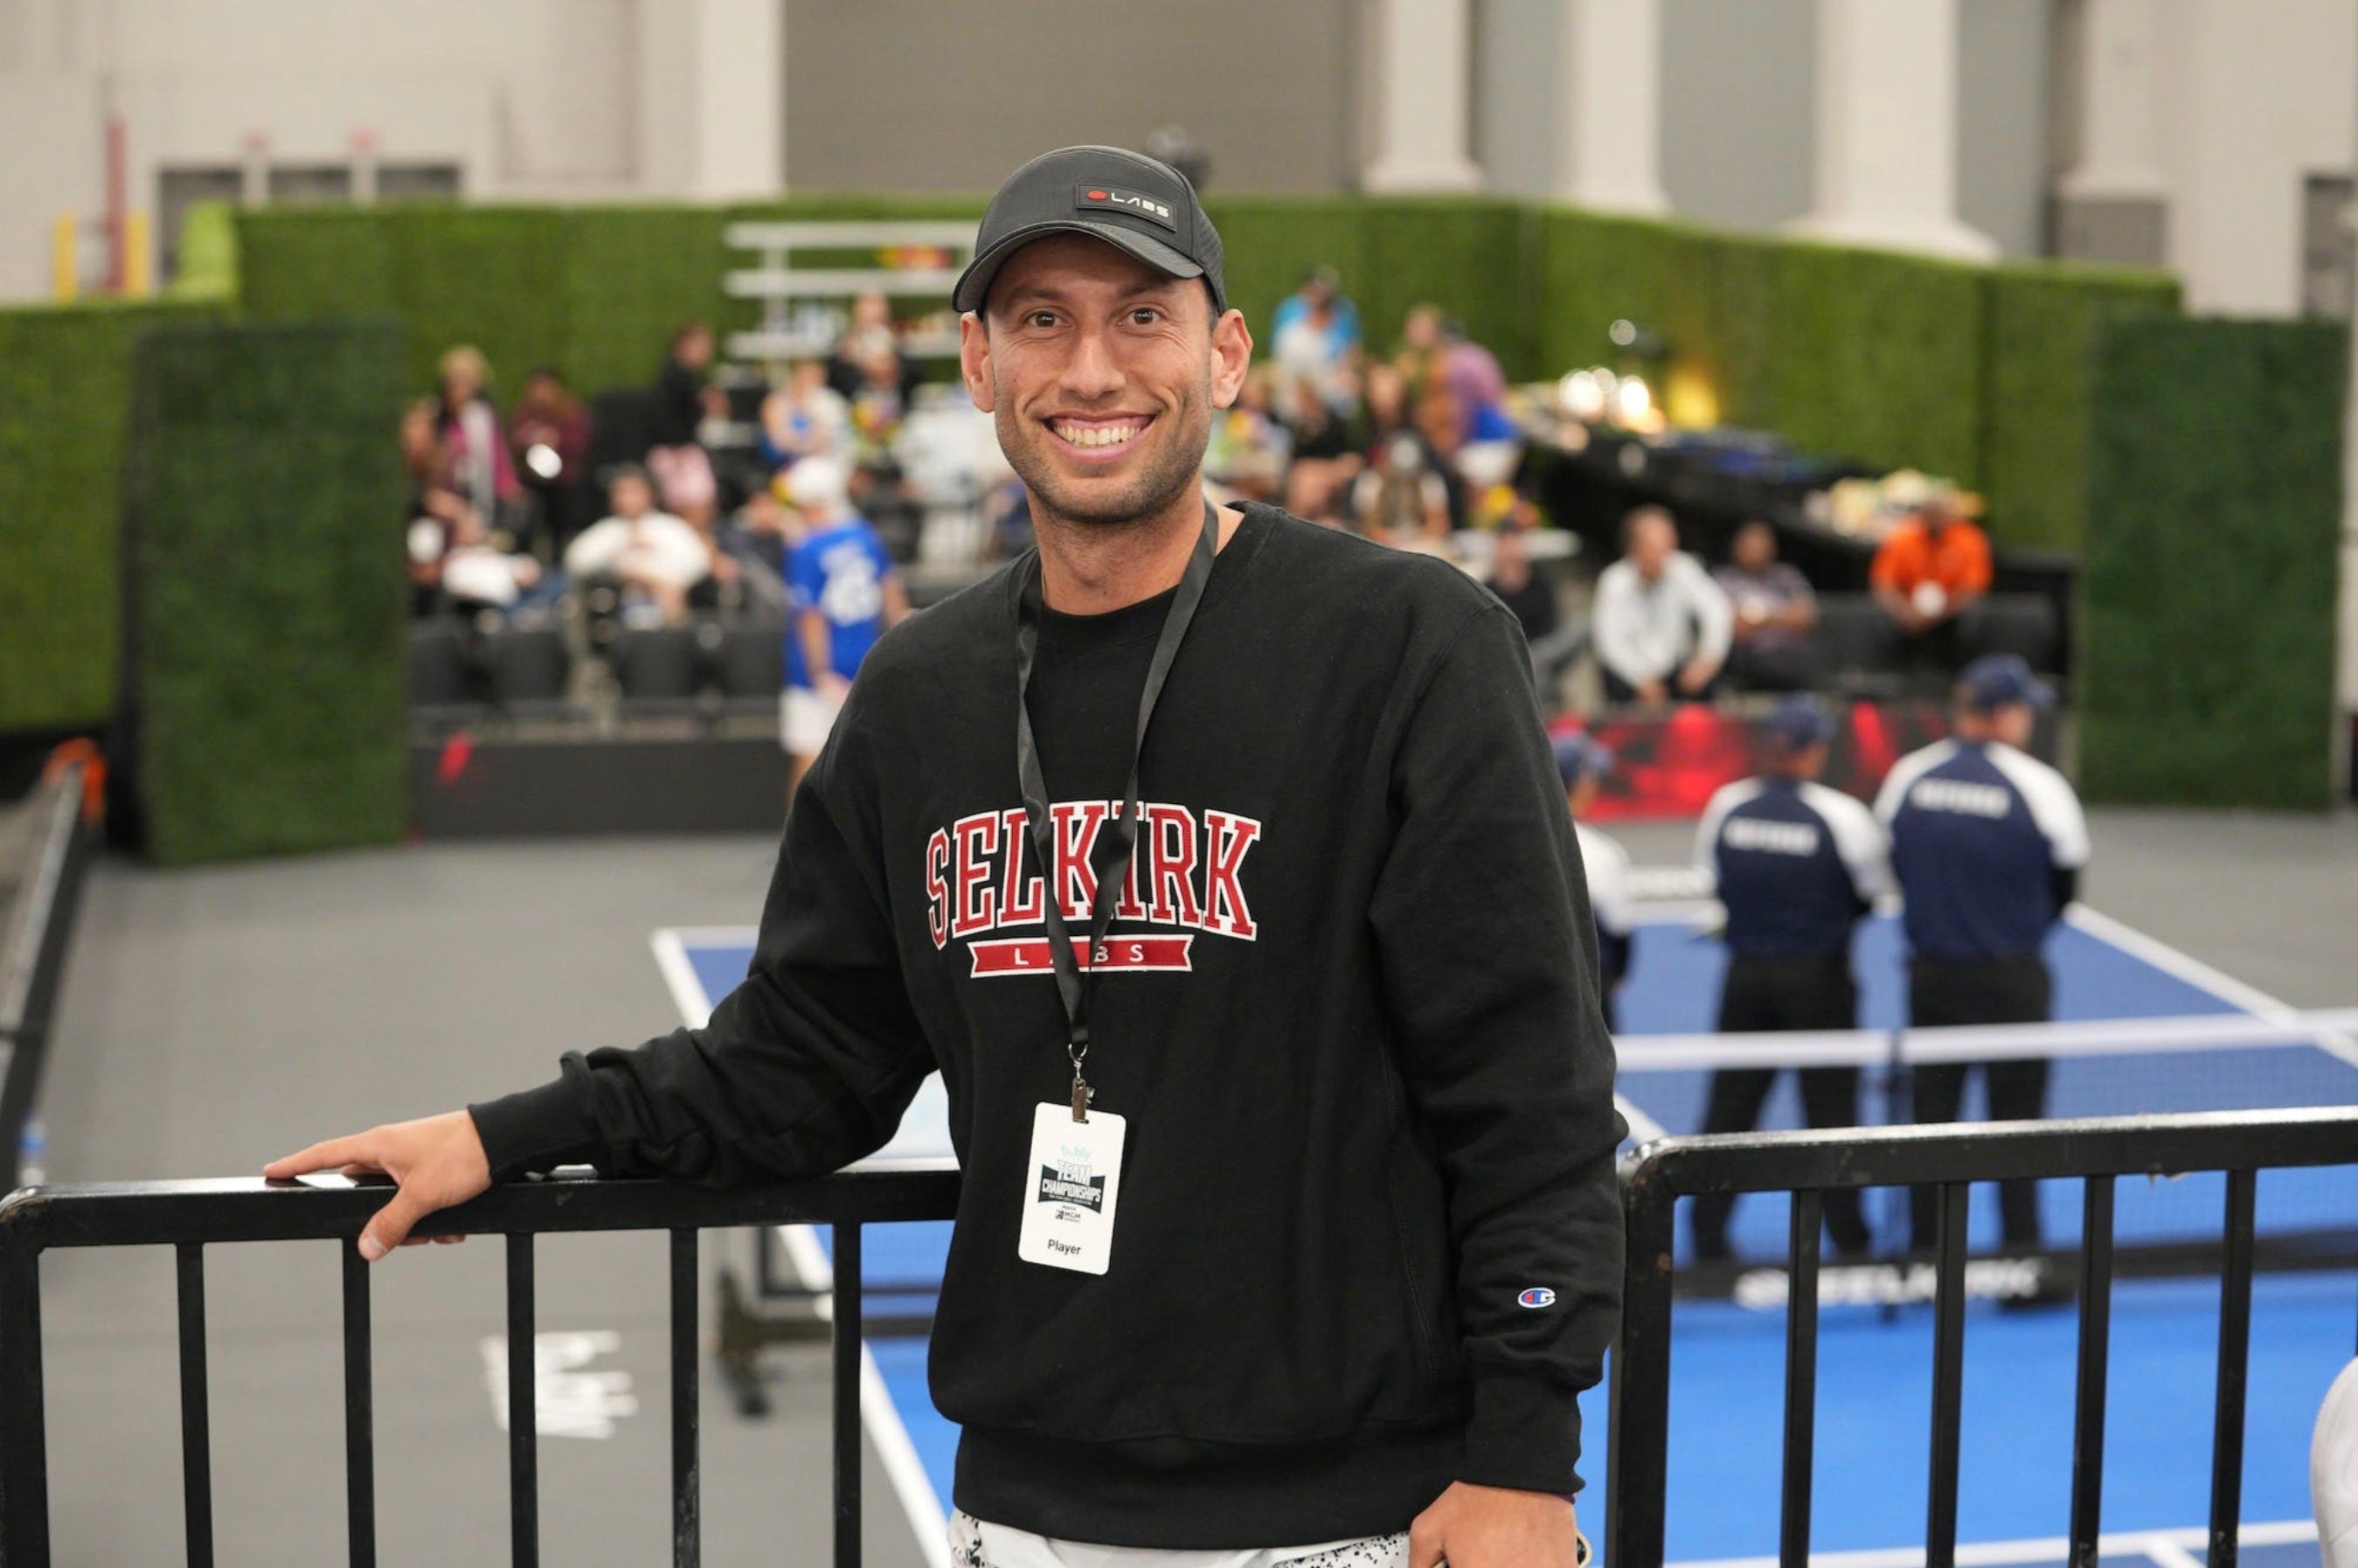 Kyle Koszuta, an industry leading influencer in pickleball and pro level player, re-signs deal with Selkirk Sport